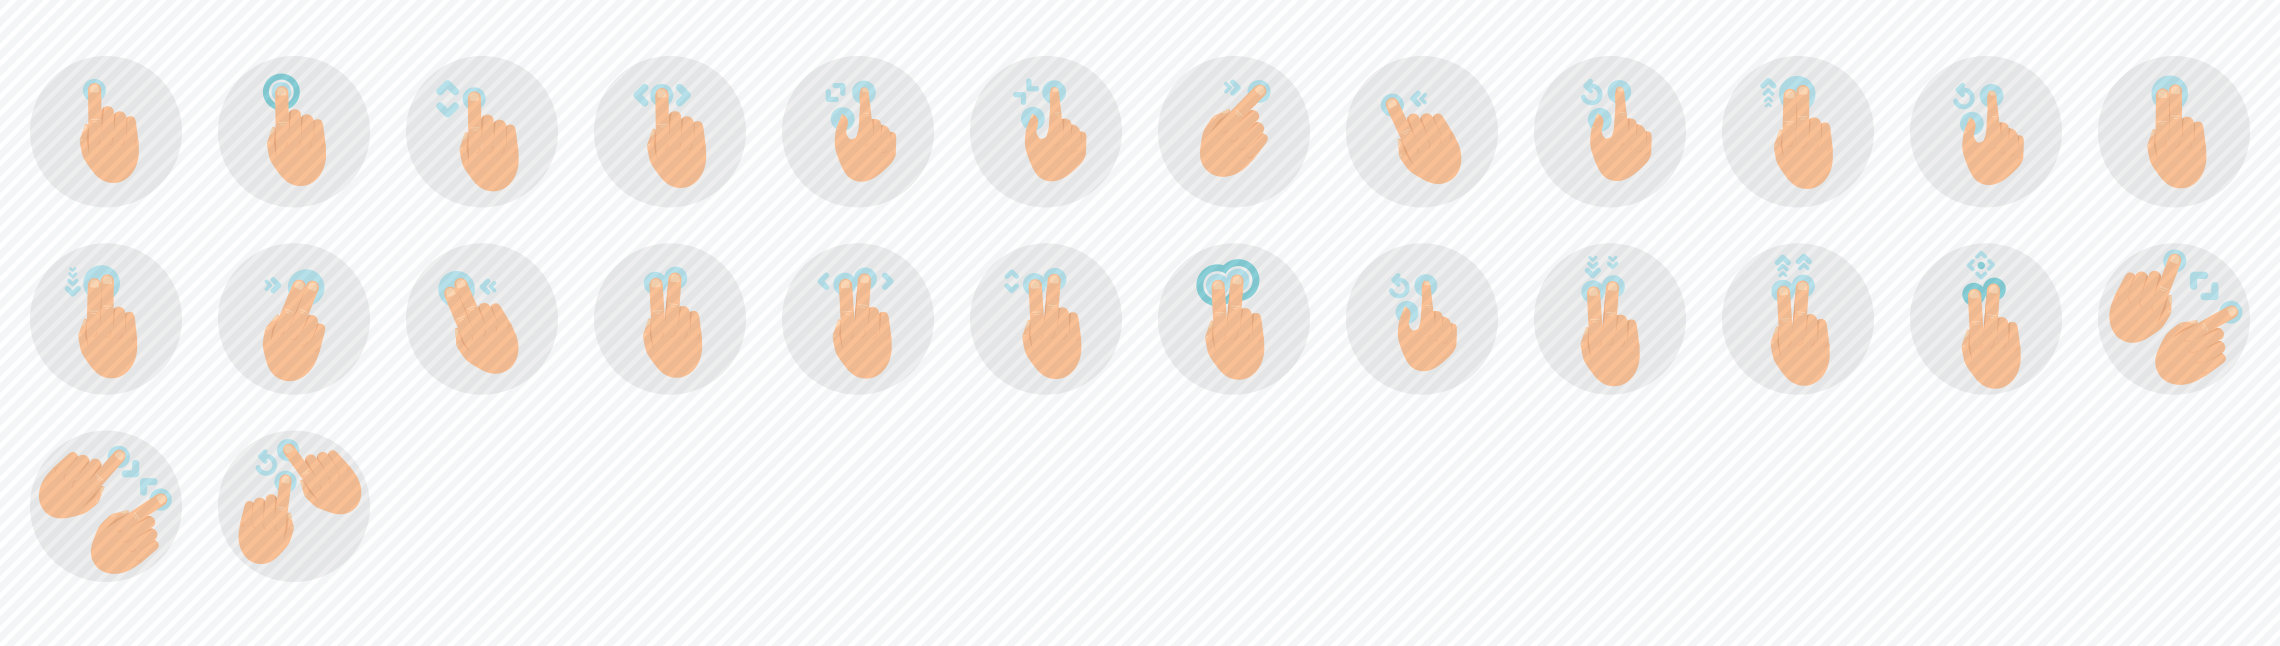 touch-gestures-flat-icons-set